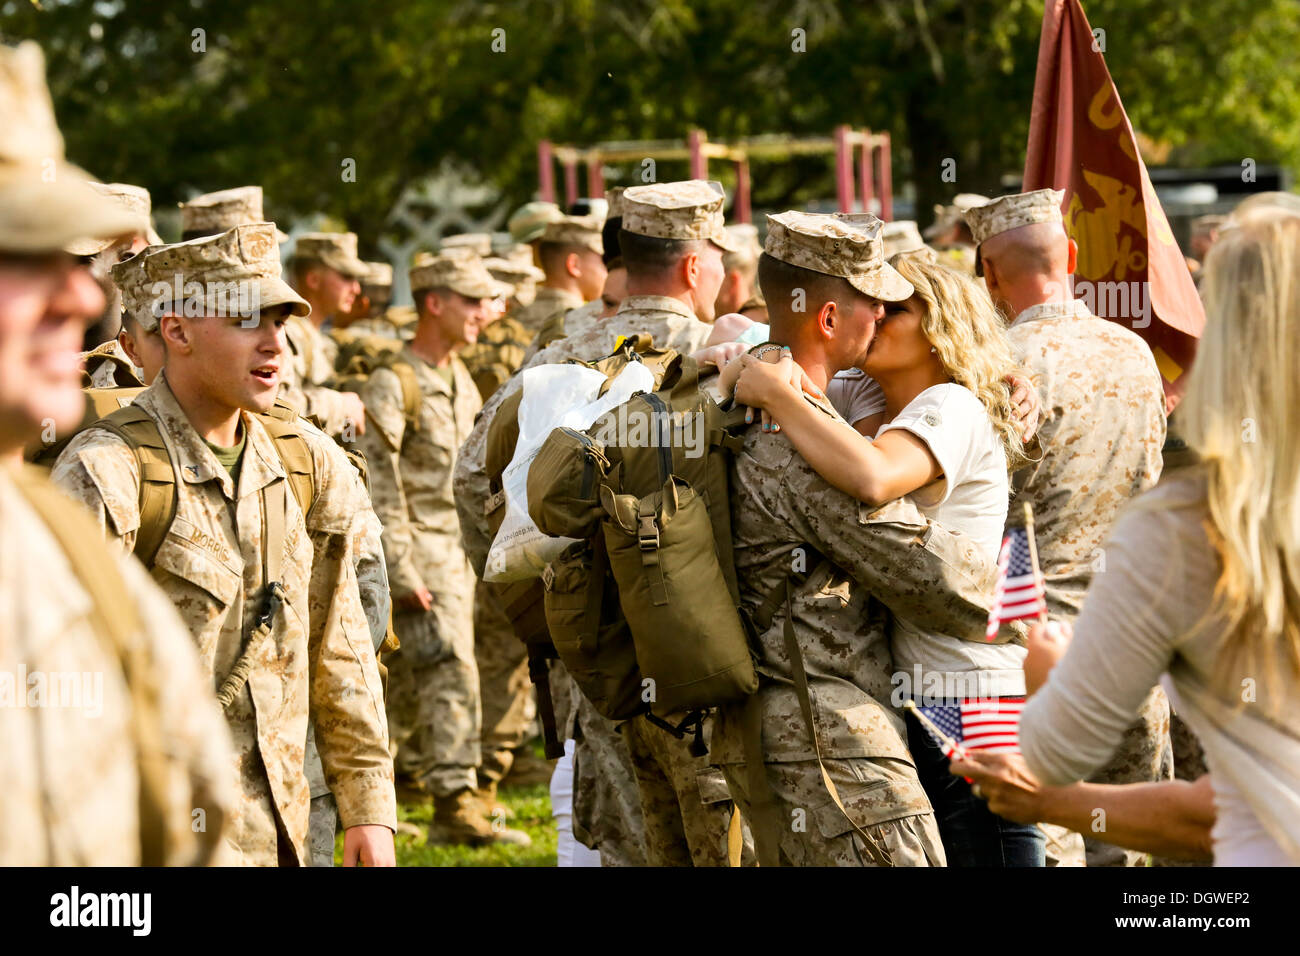 MARINE CORPS BASE CAMP LEJEUNE, N.C. - Marines and sailors with Fox Company, 2nd Battalion, 2nd Marine Regiment, return home to Stock Photo